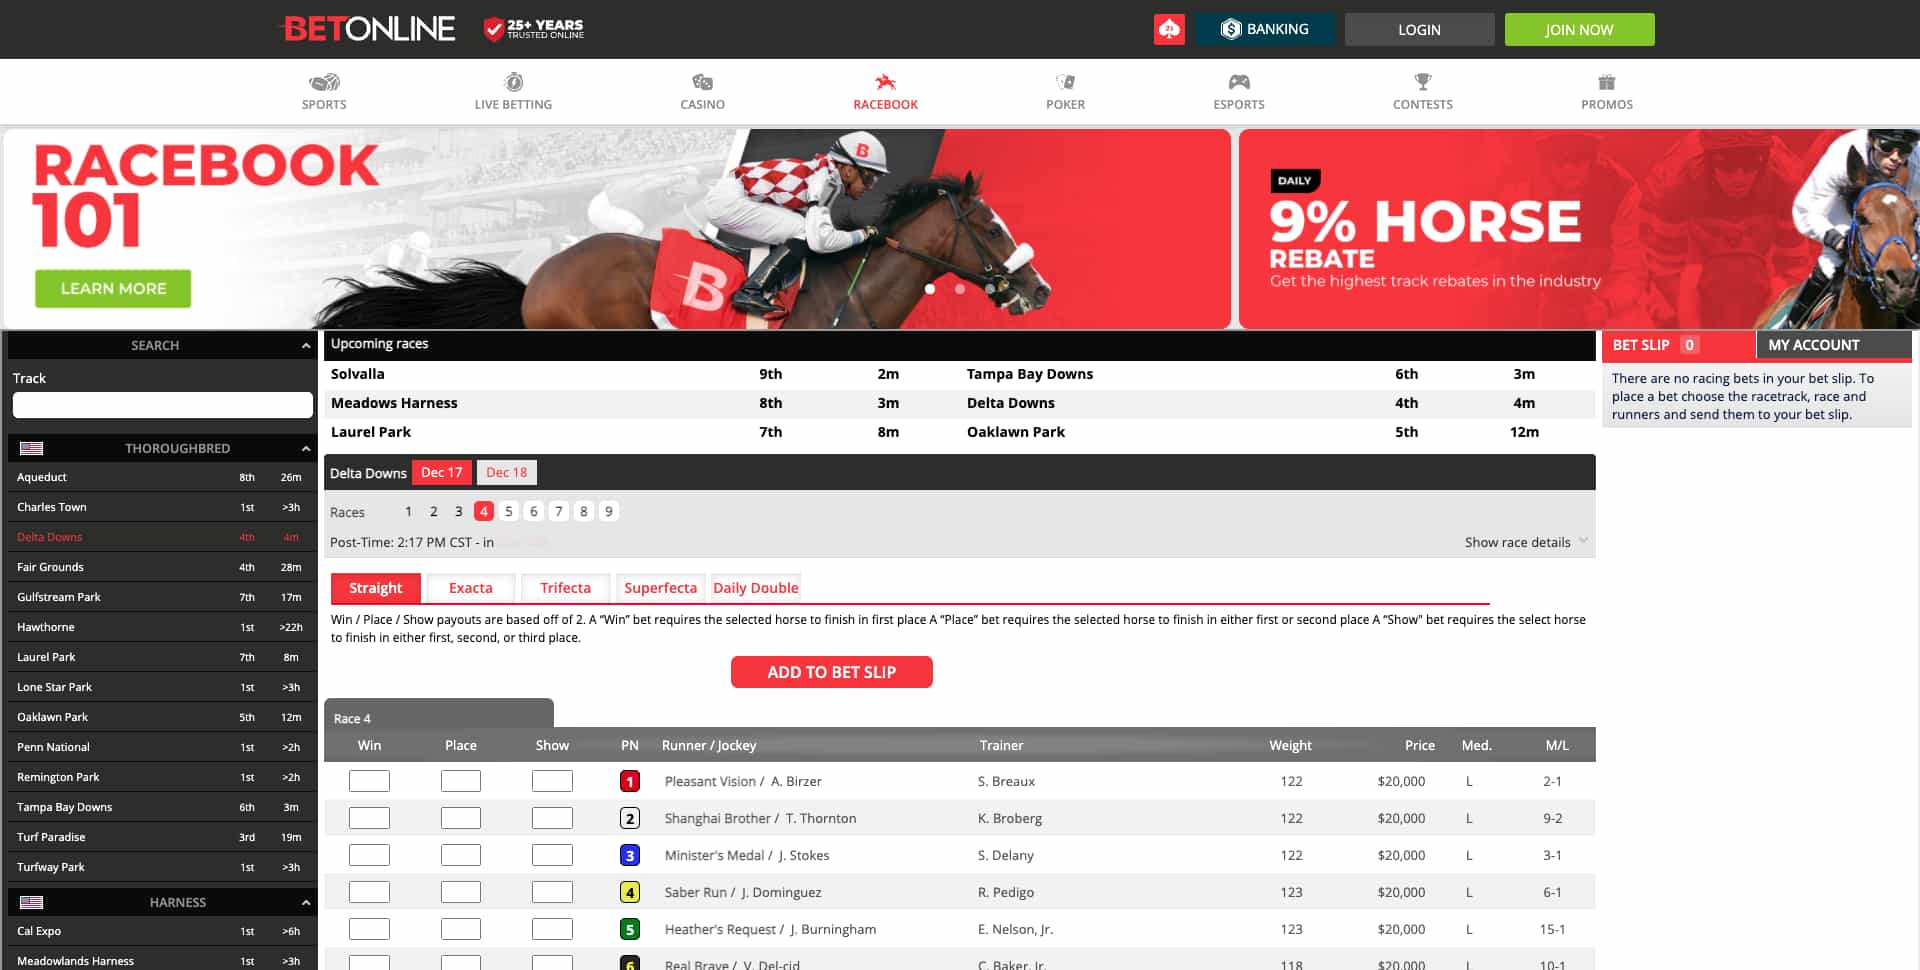 Bet on horse racing with BetOnline